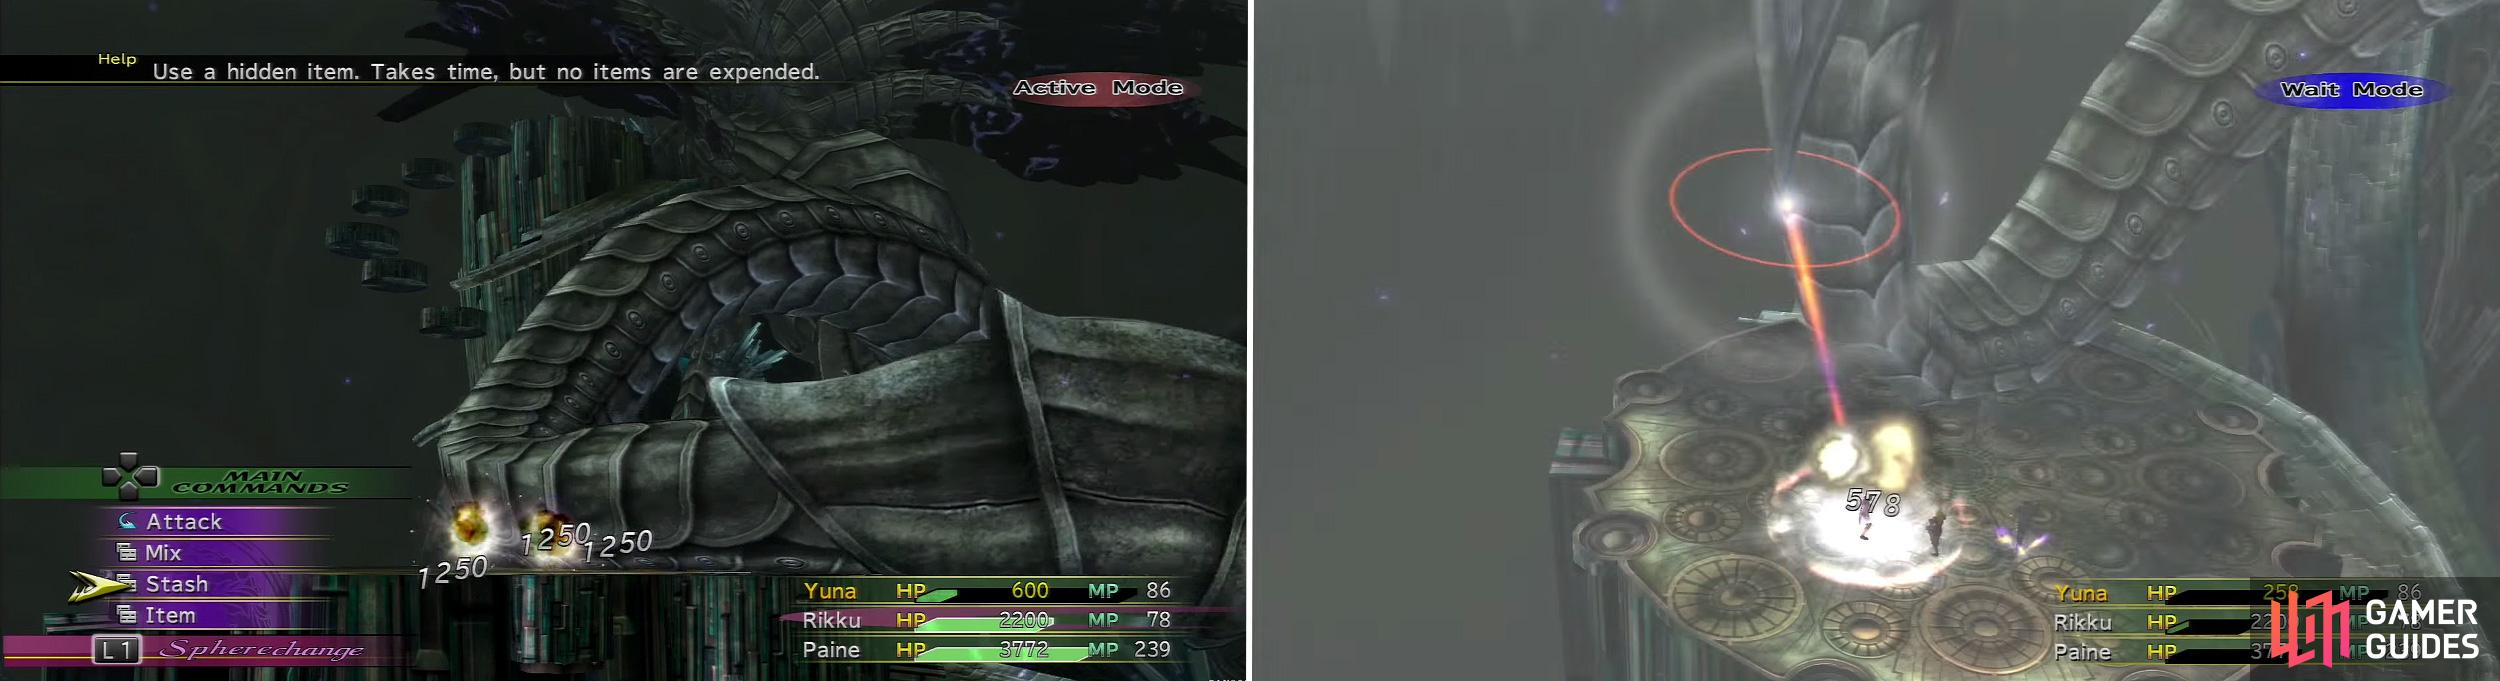 Shadow of the Colossus (PS2/PS3) (FULL GAME Walkthrough Part 1/6